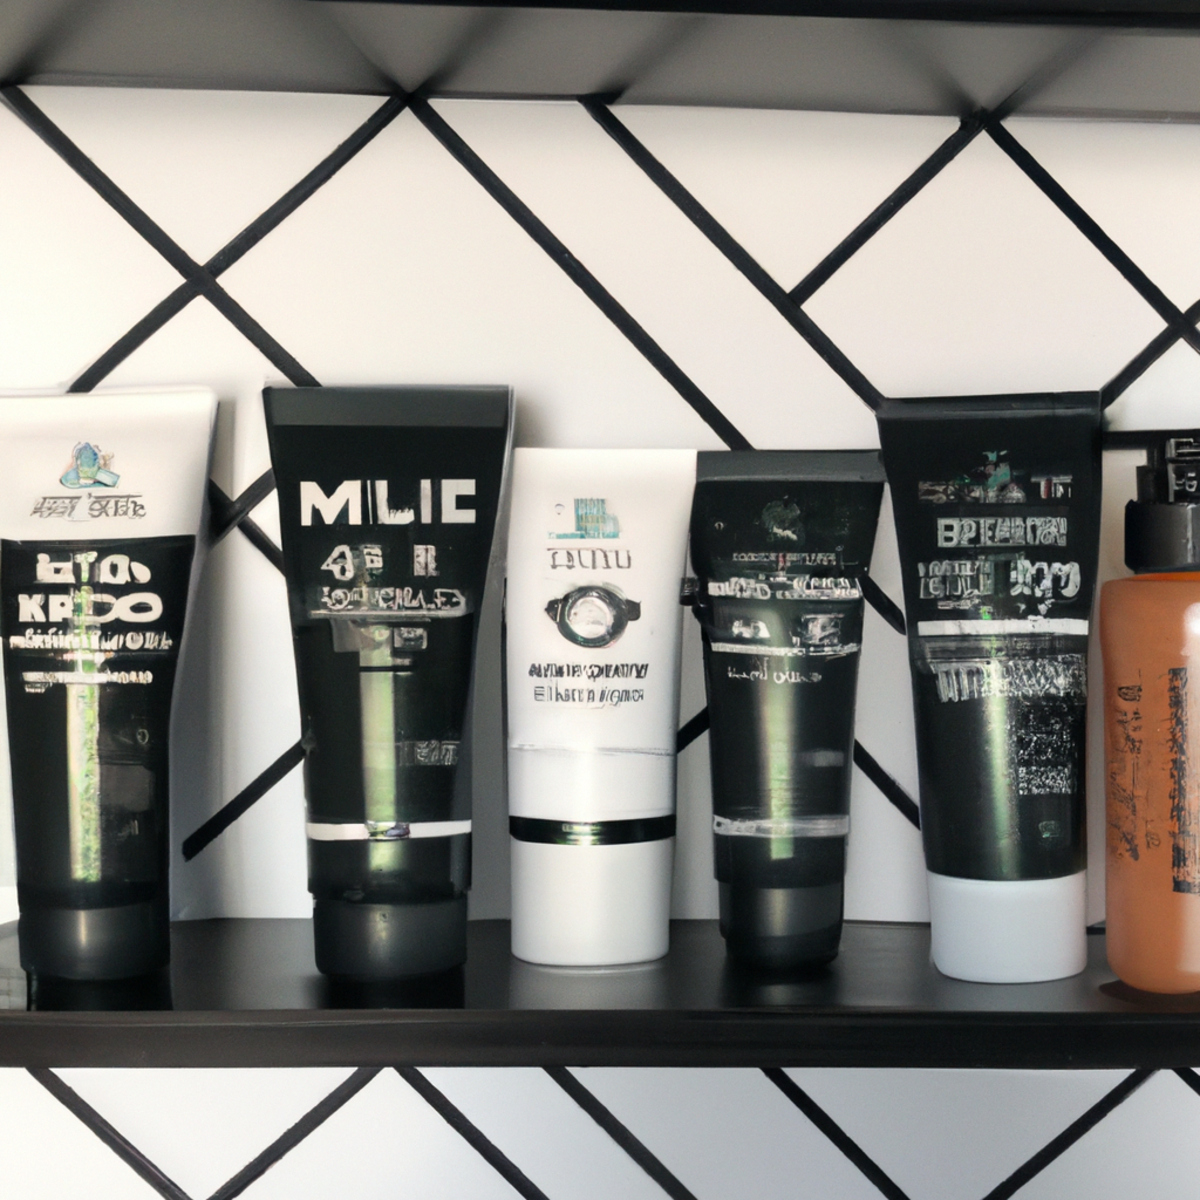 Get ready to elevate your grooming game with these natural skin care routines that will leave you feeling fresh and looking sharp. From cleansers to serums, this collection has got you covered. Who says men can't have flawless skin?